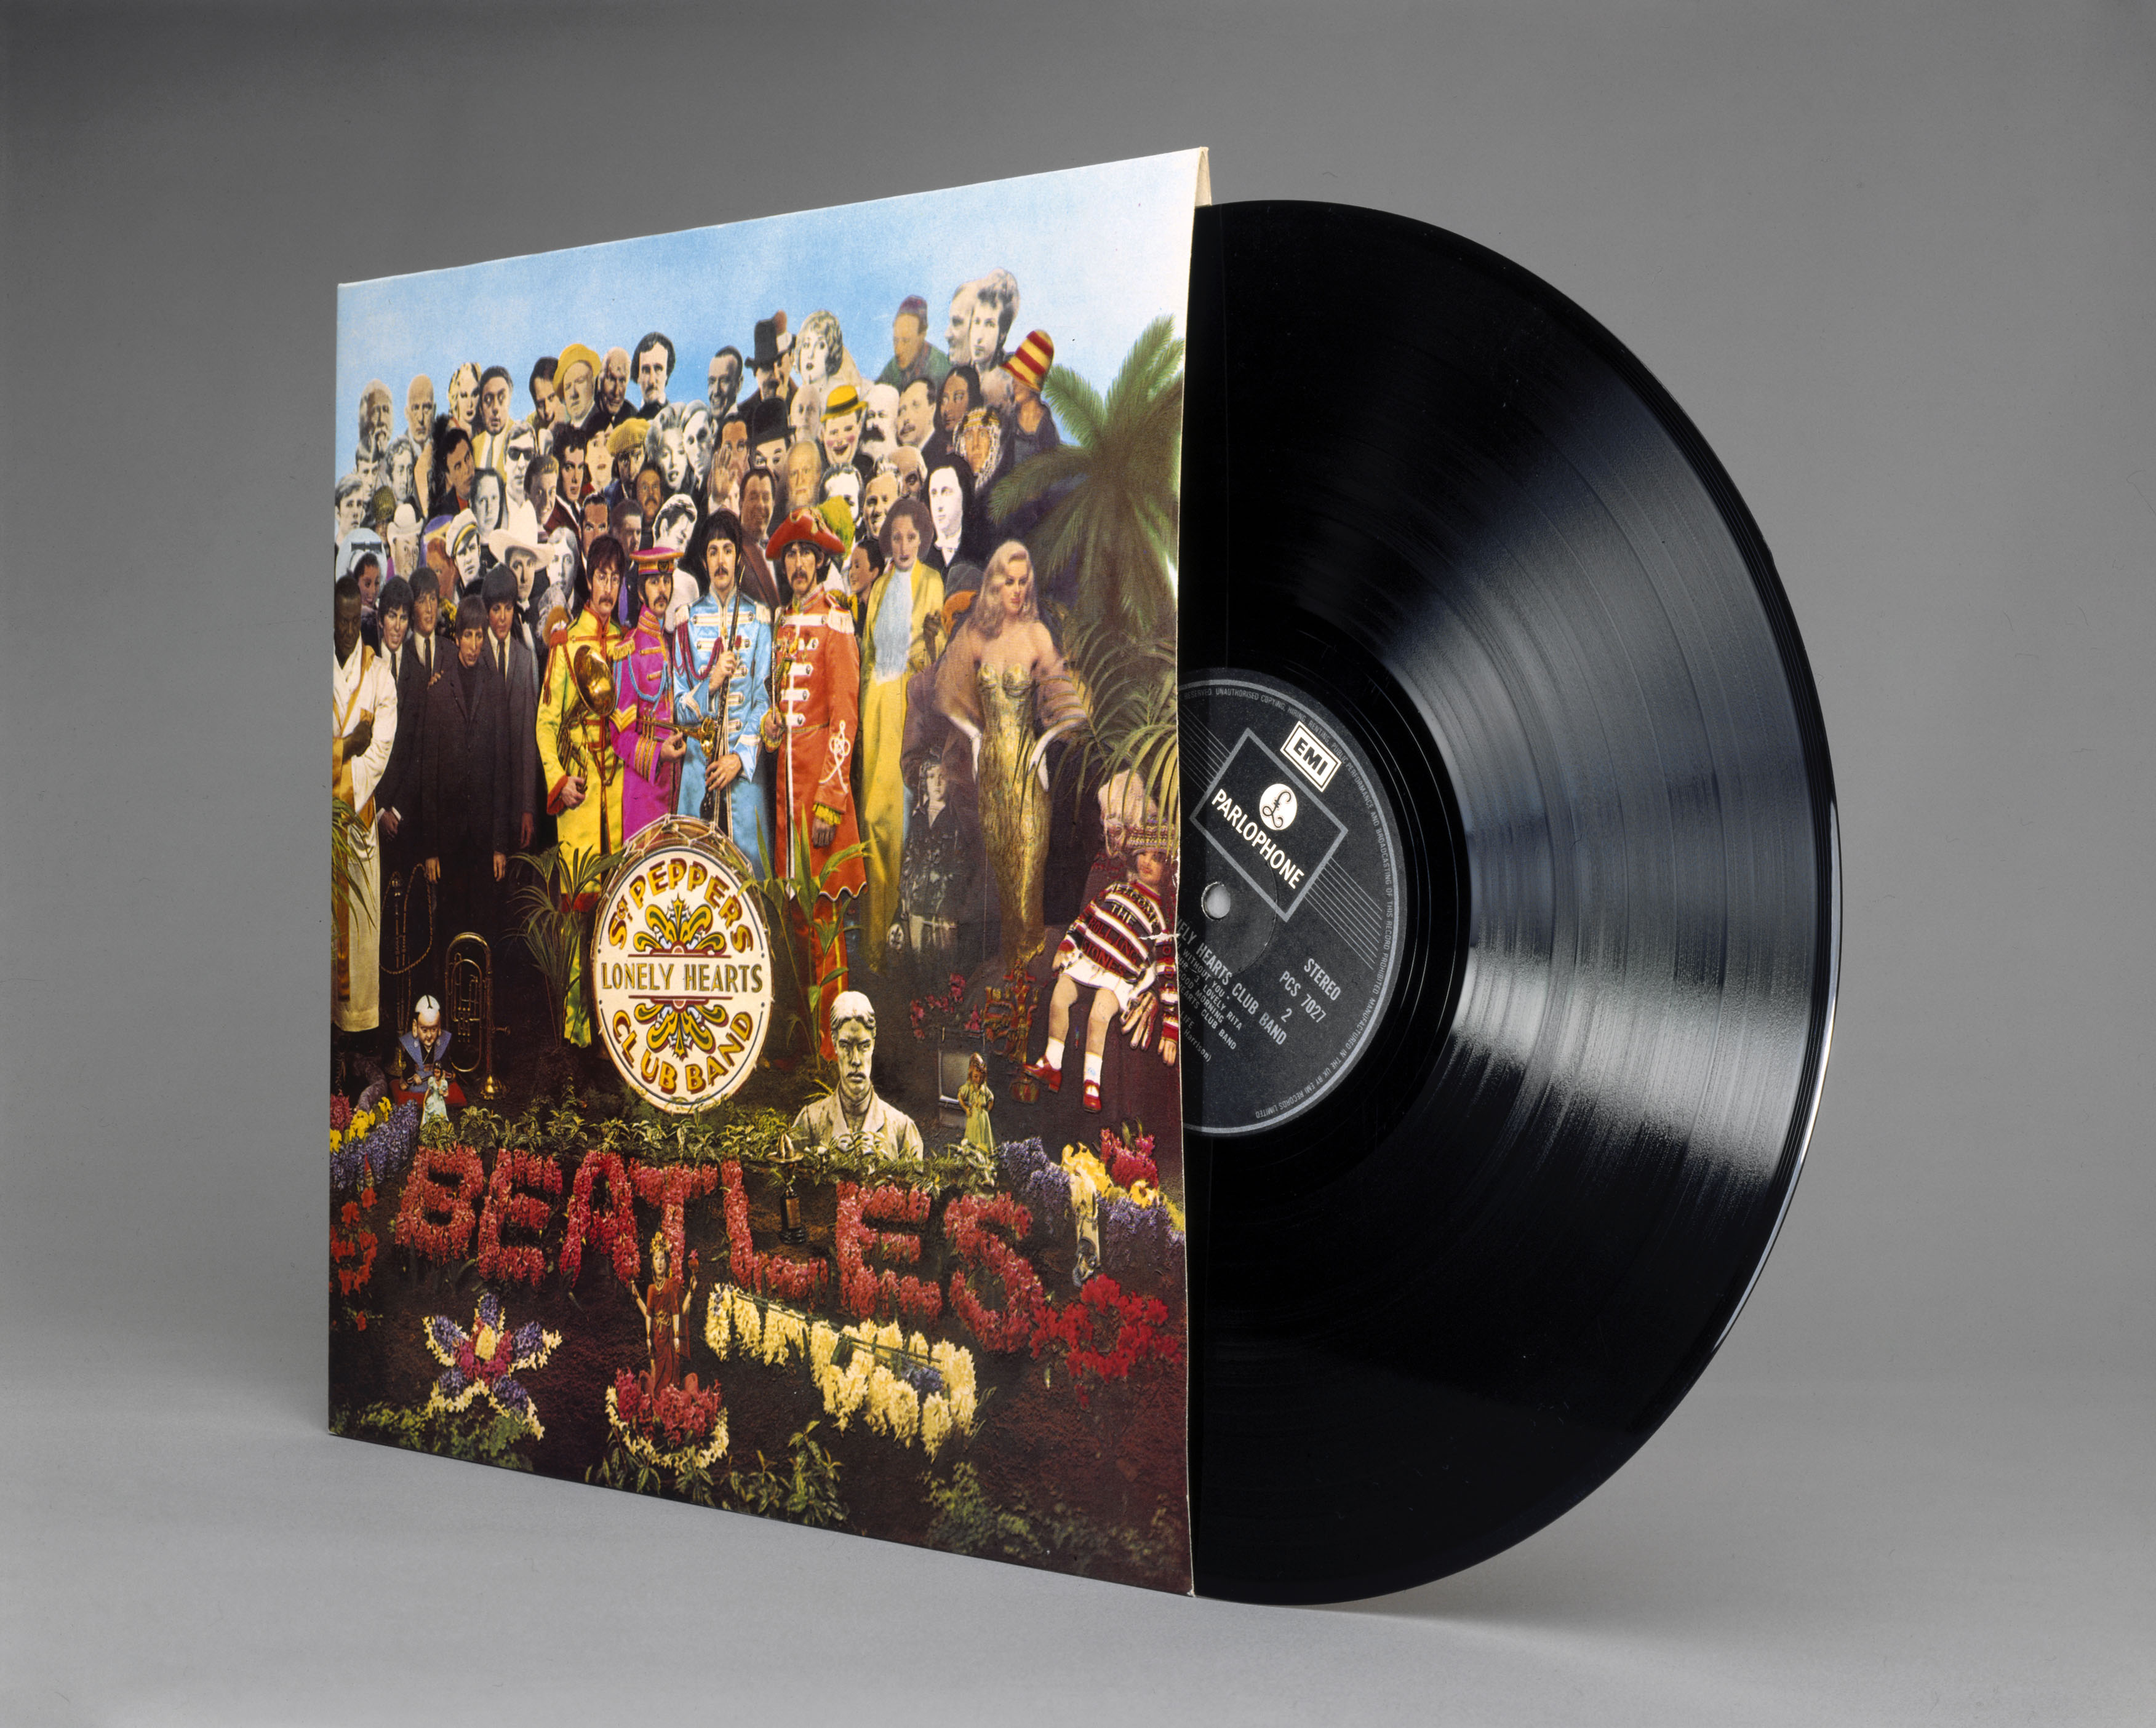 A vinyl copy of The Beatles' Sgt. Pepper's Lonely Hearts Club Band